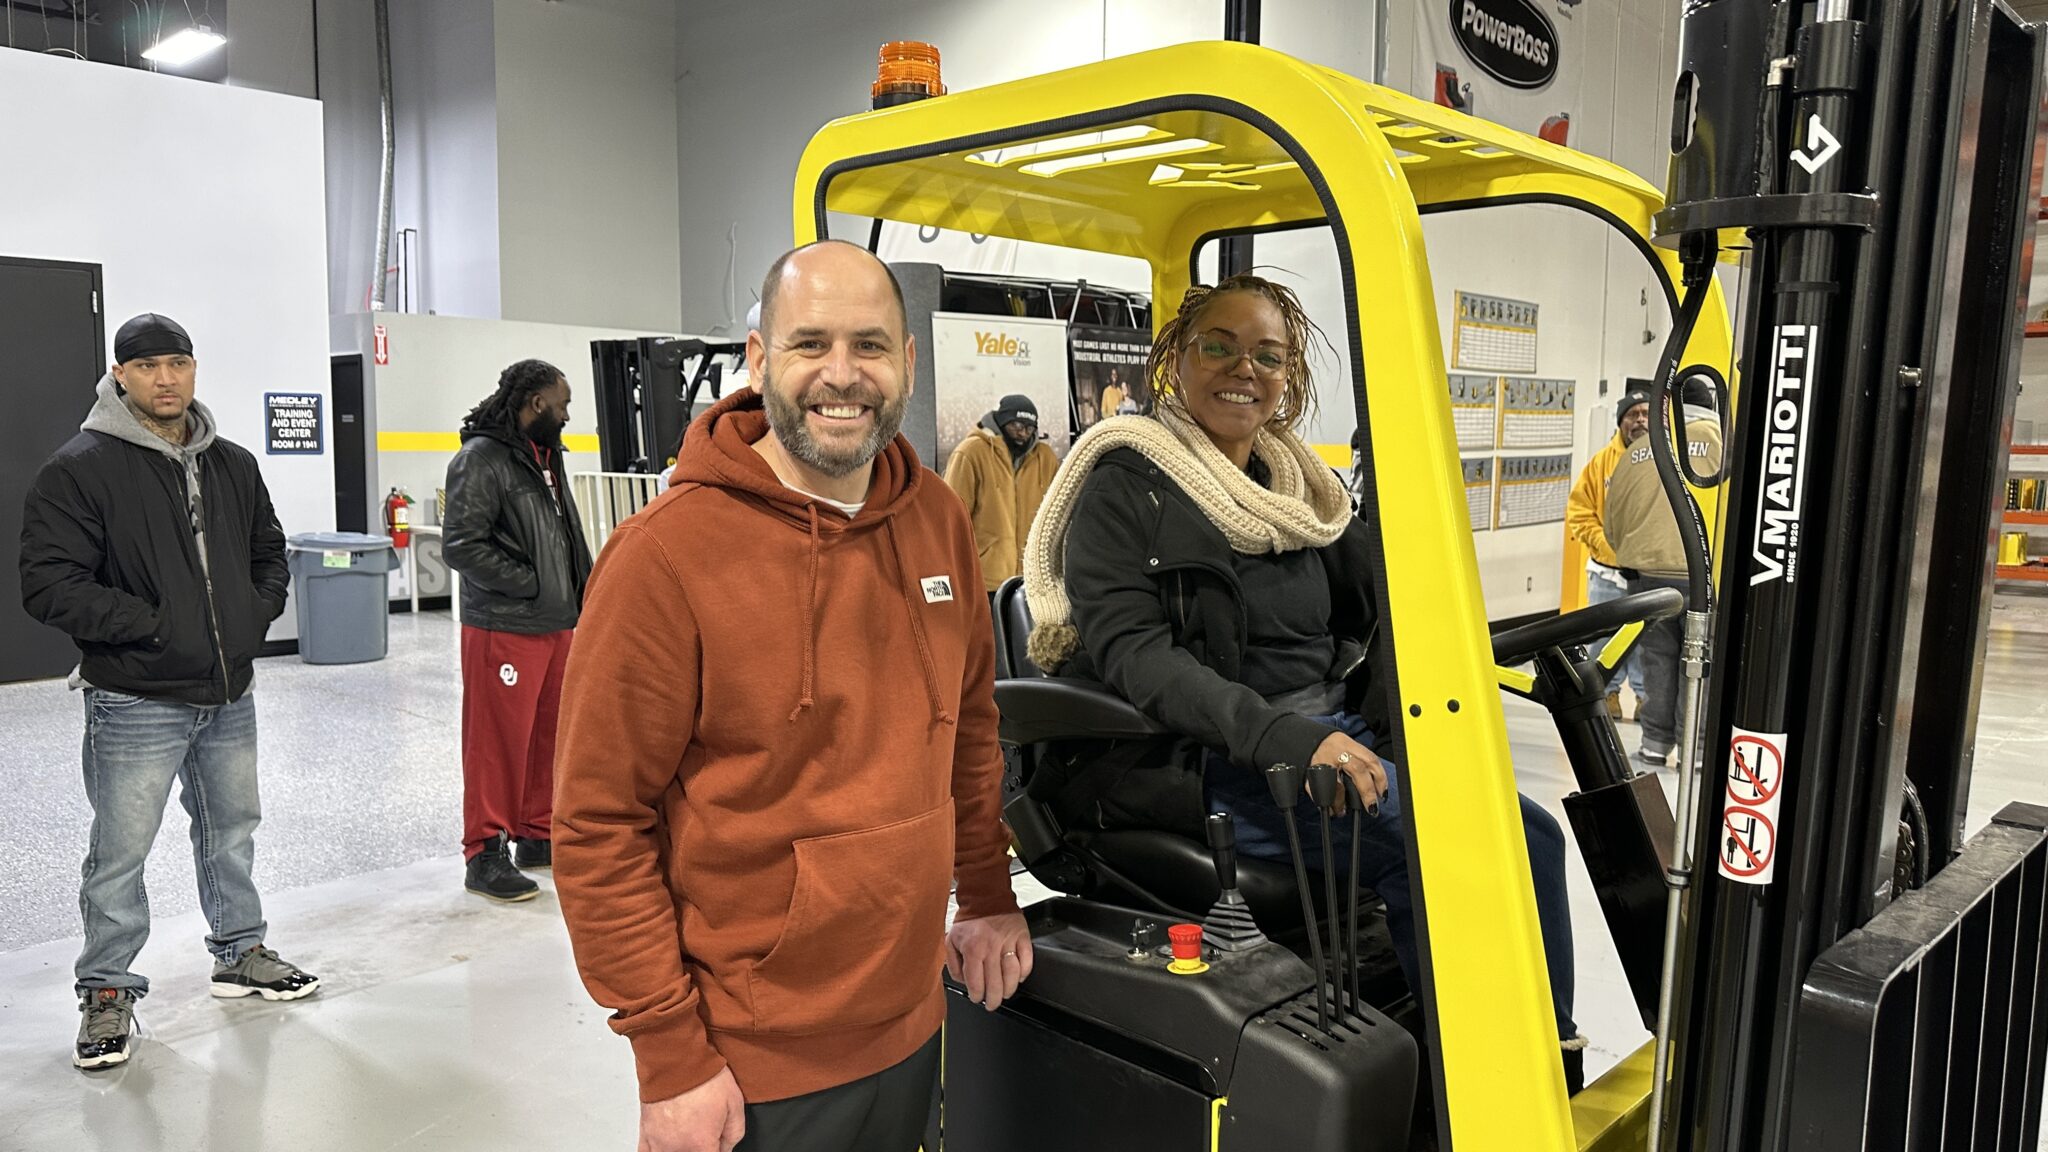 Pictured here, Medley Equipment Company, Brandon Kirkpatrick, Training and Business Development Manager posing with  Sharryc Smith, M.S., BHCMII 
Assistant Advocate Counselor, Reentry Employment Specialist
Urban League of Greater Oklahoma City before giving her a hands-on demonstration of Medley donated Lift Truck by Mariotti.
